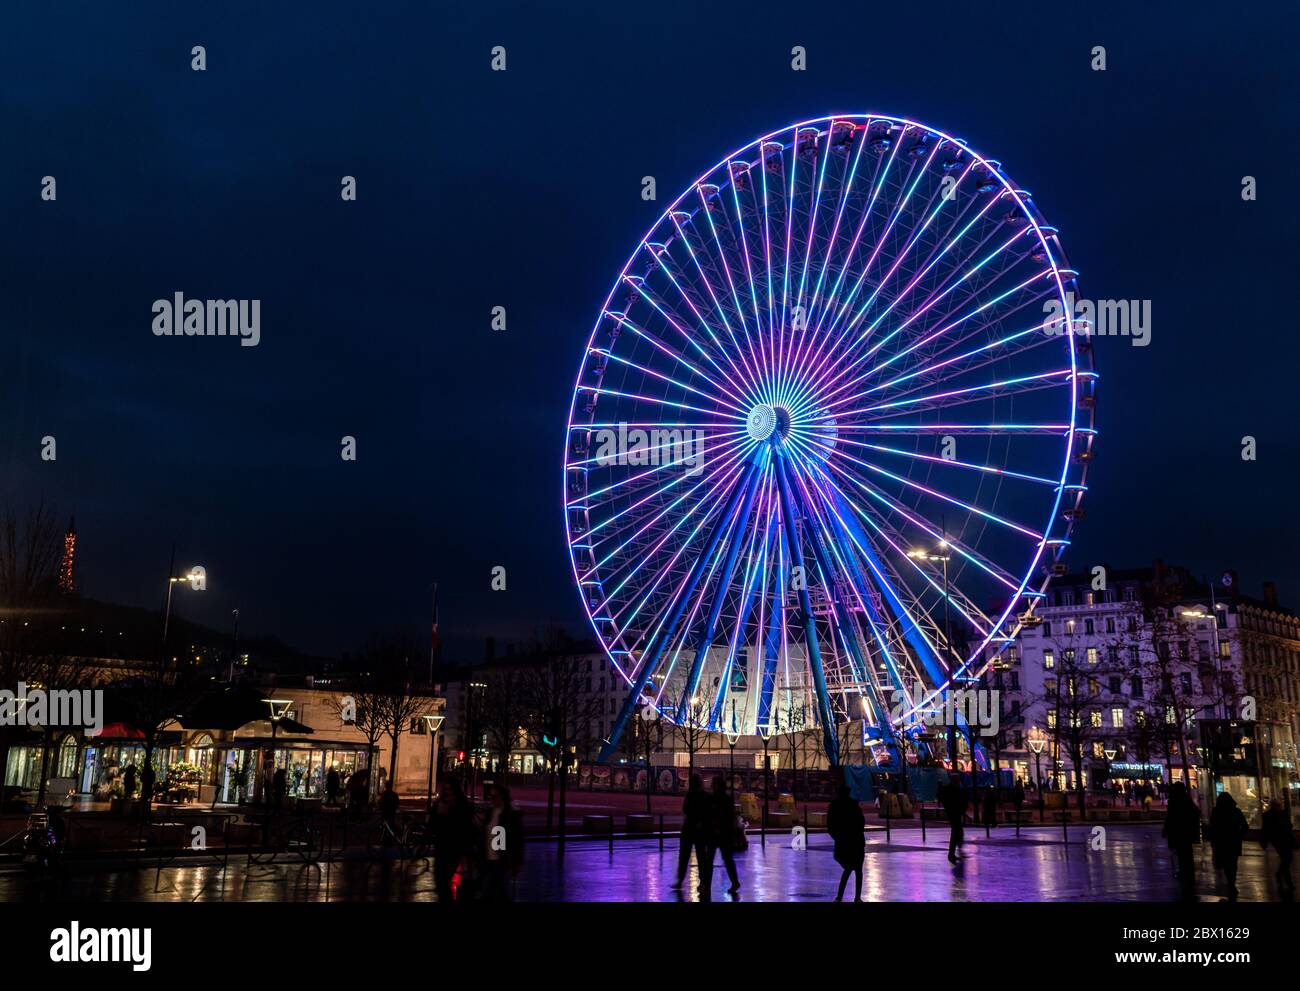 Lyon, France 3rd January 2020 - Ferris wheel at night on the Place Bellecour in the center of Lyon. Lit up by light in all coulors. Stock Photo